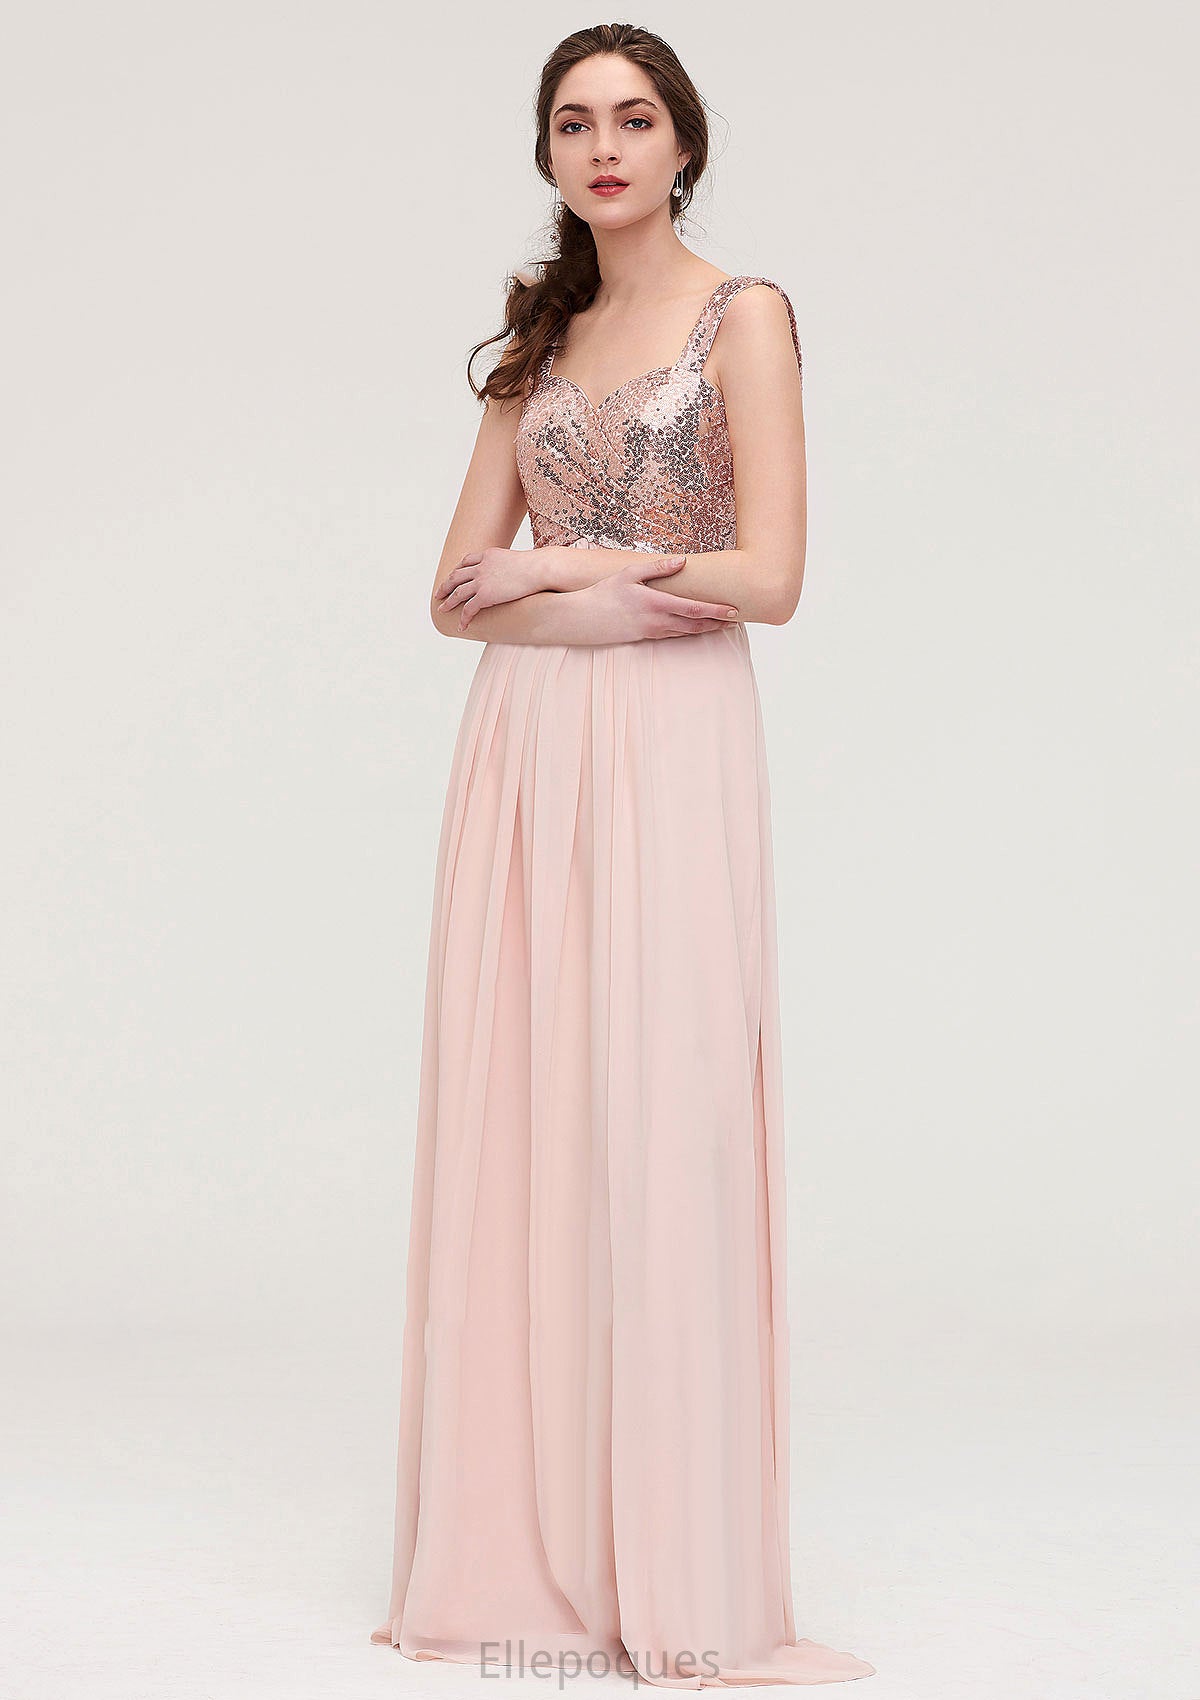 Sleeveless Long/Floor-Length Sweetheart A-line/Princess Chiffon Bridesmaid Dresses With Pleated Sequins Rylie HOP0025494